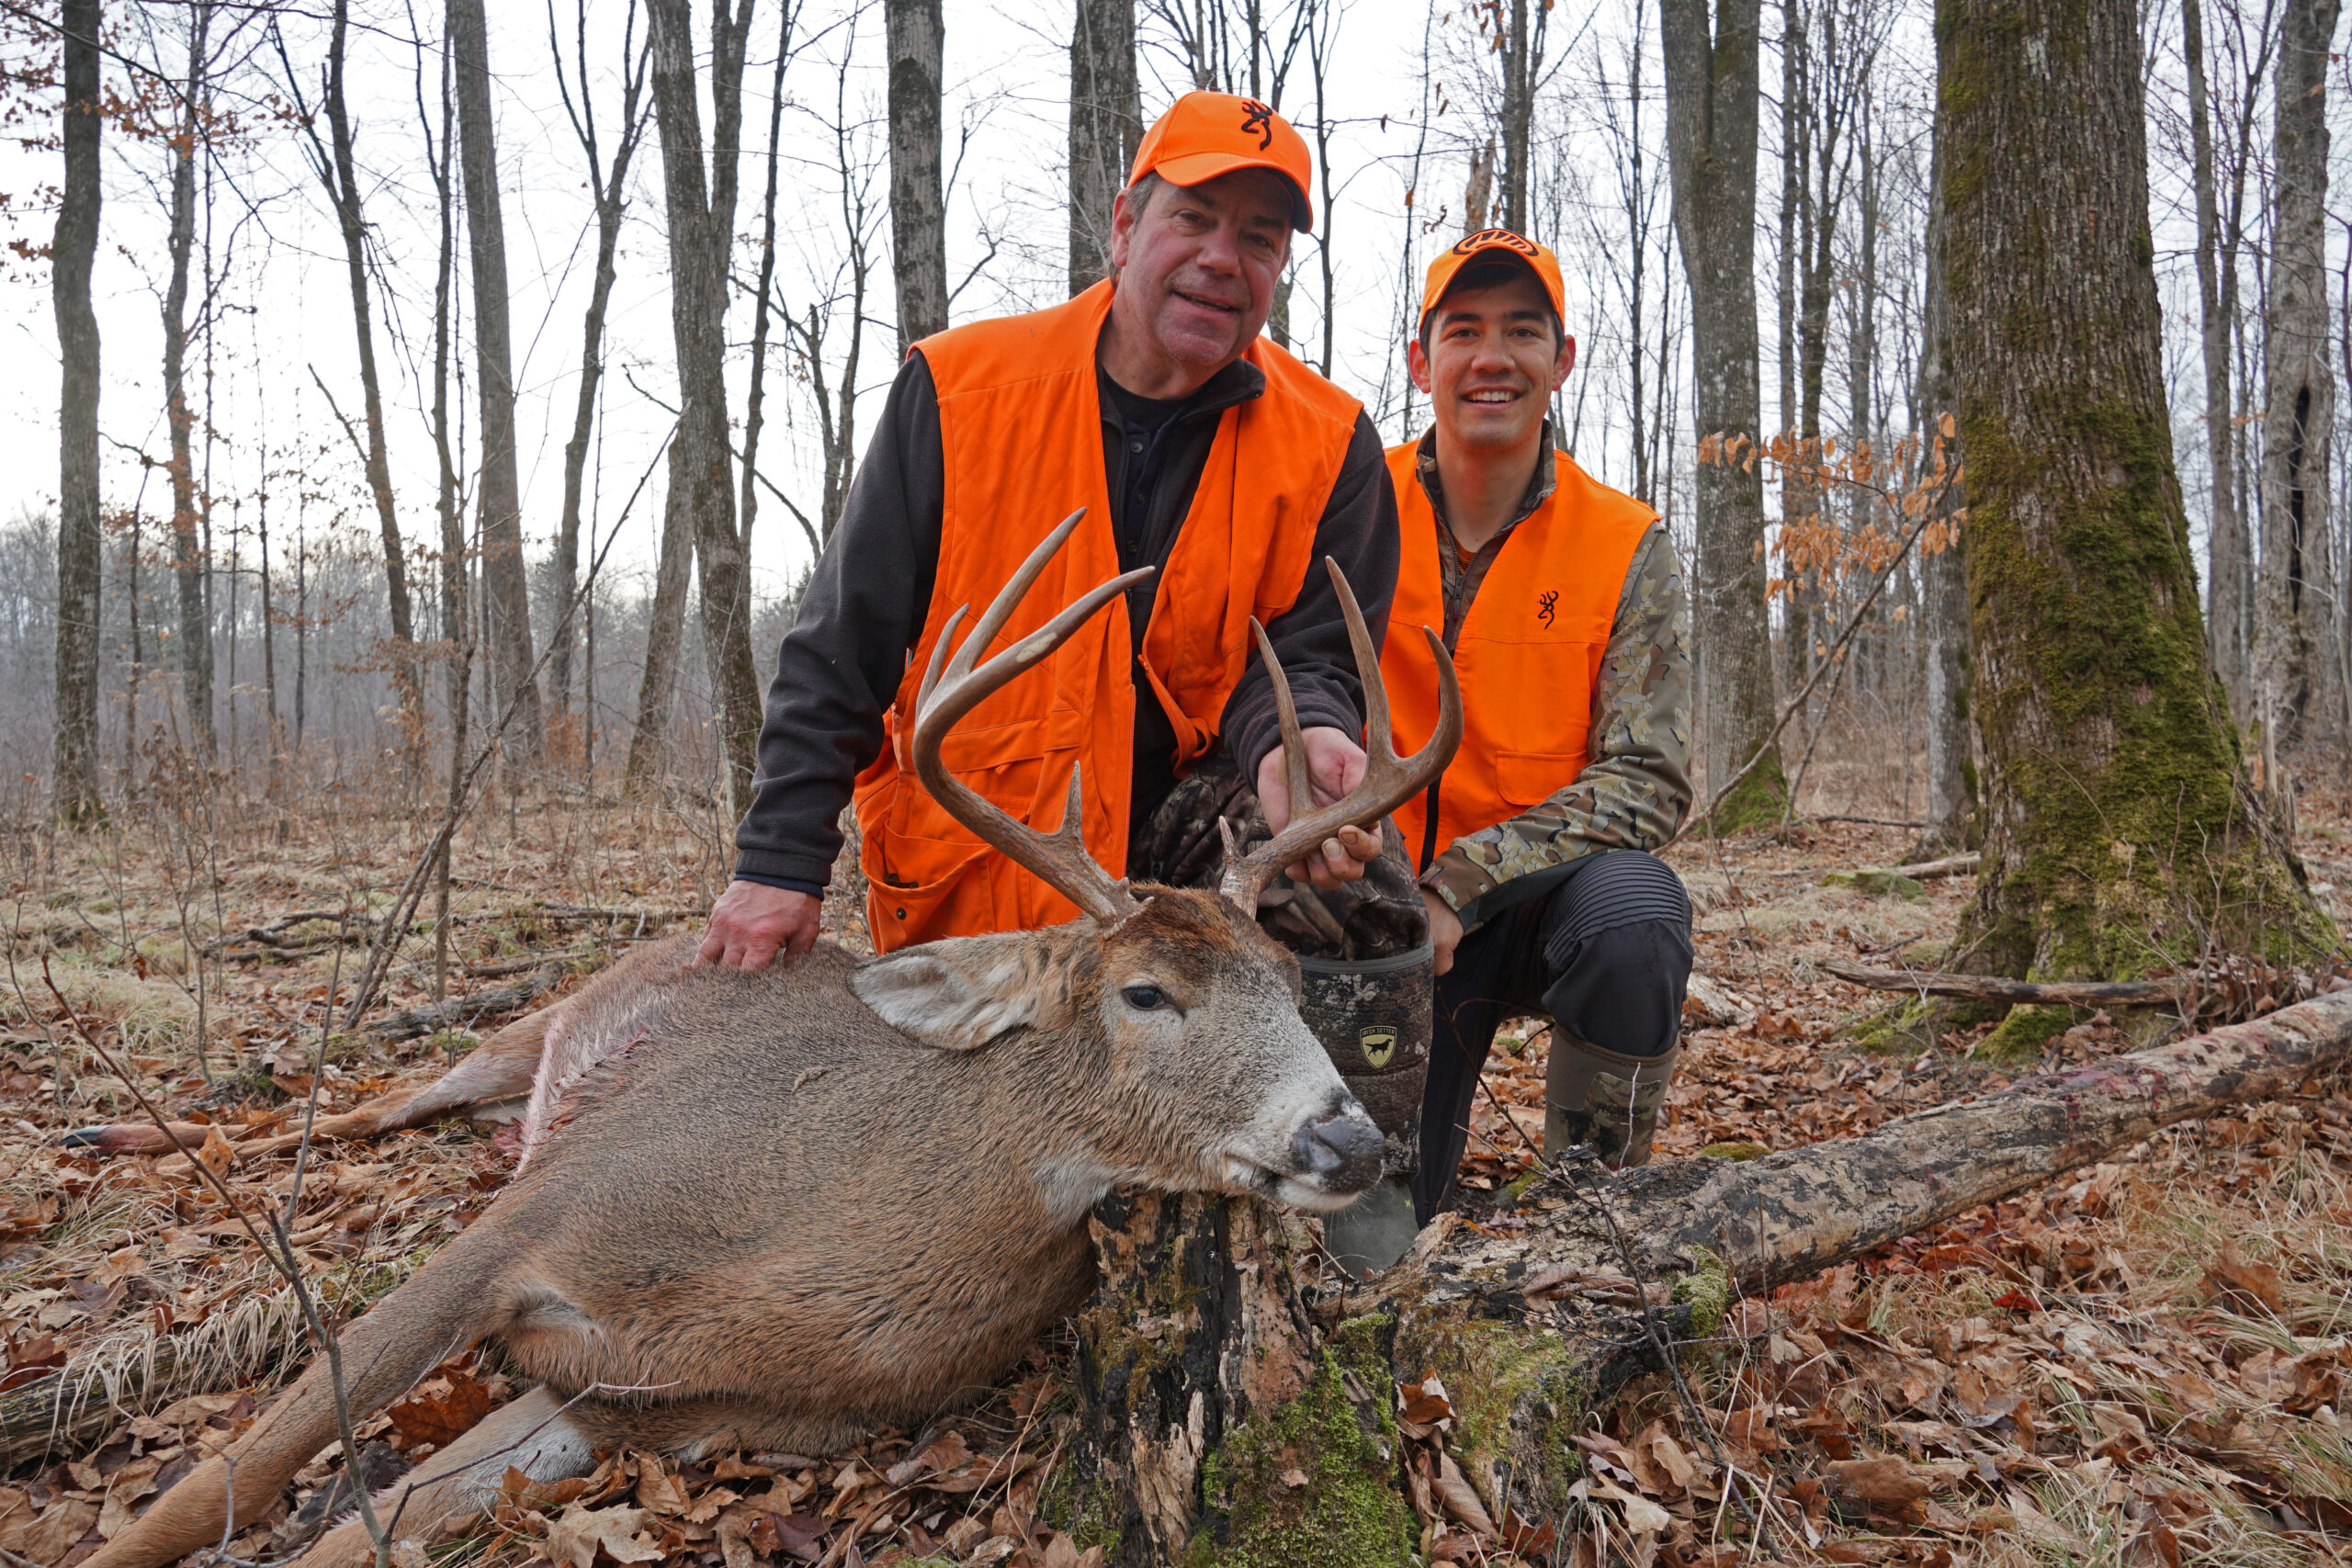 The Midwest and South (Not the West) Are the Heartbeat of Hunting in America